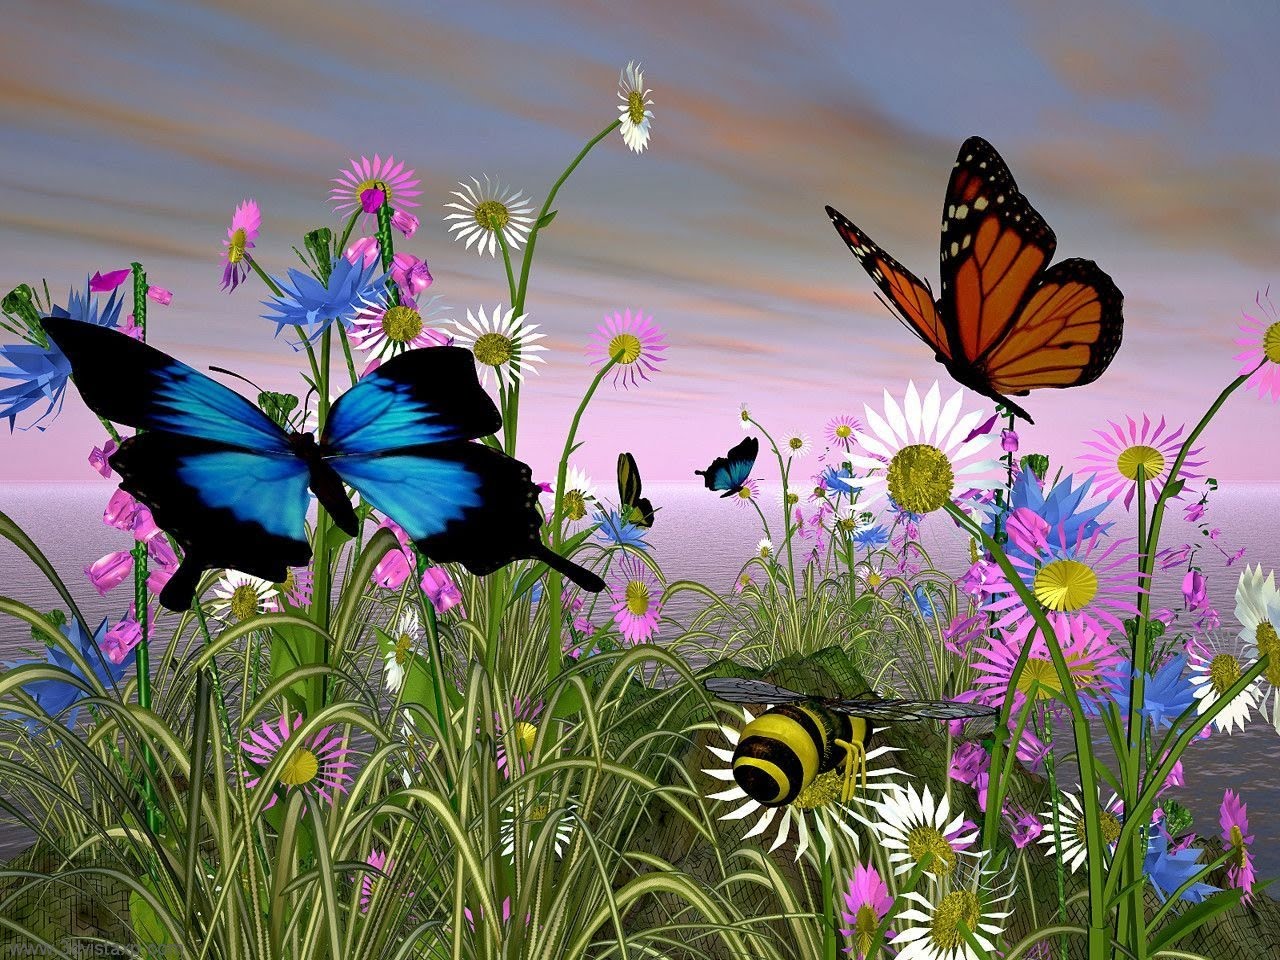 Beautiful Butterfly of nature inspire human to naturally create growth